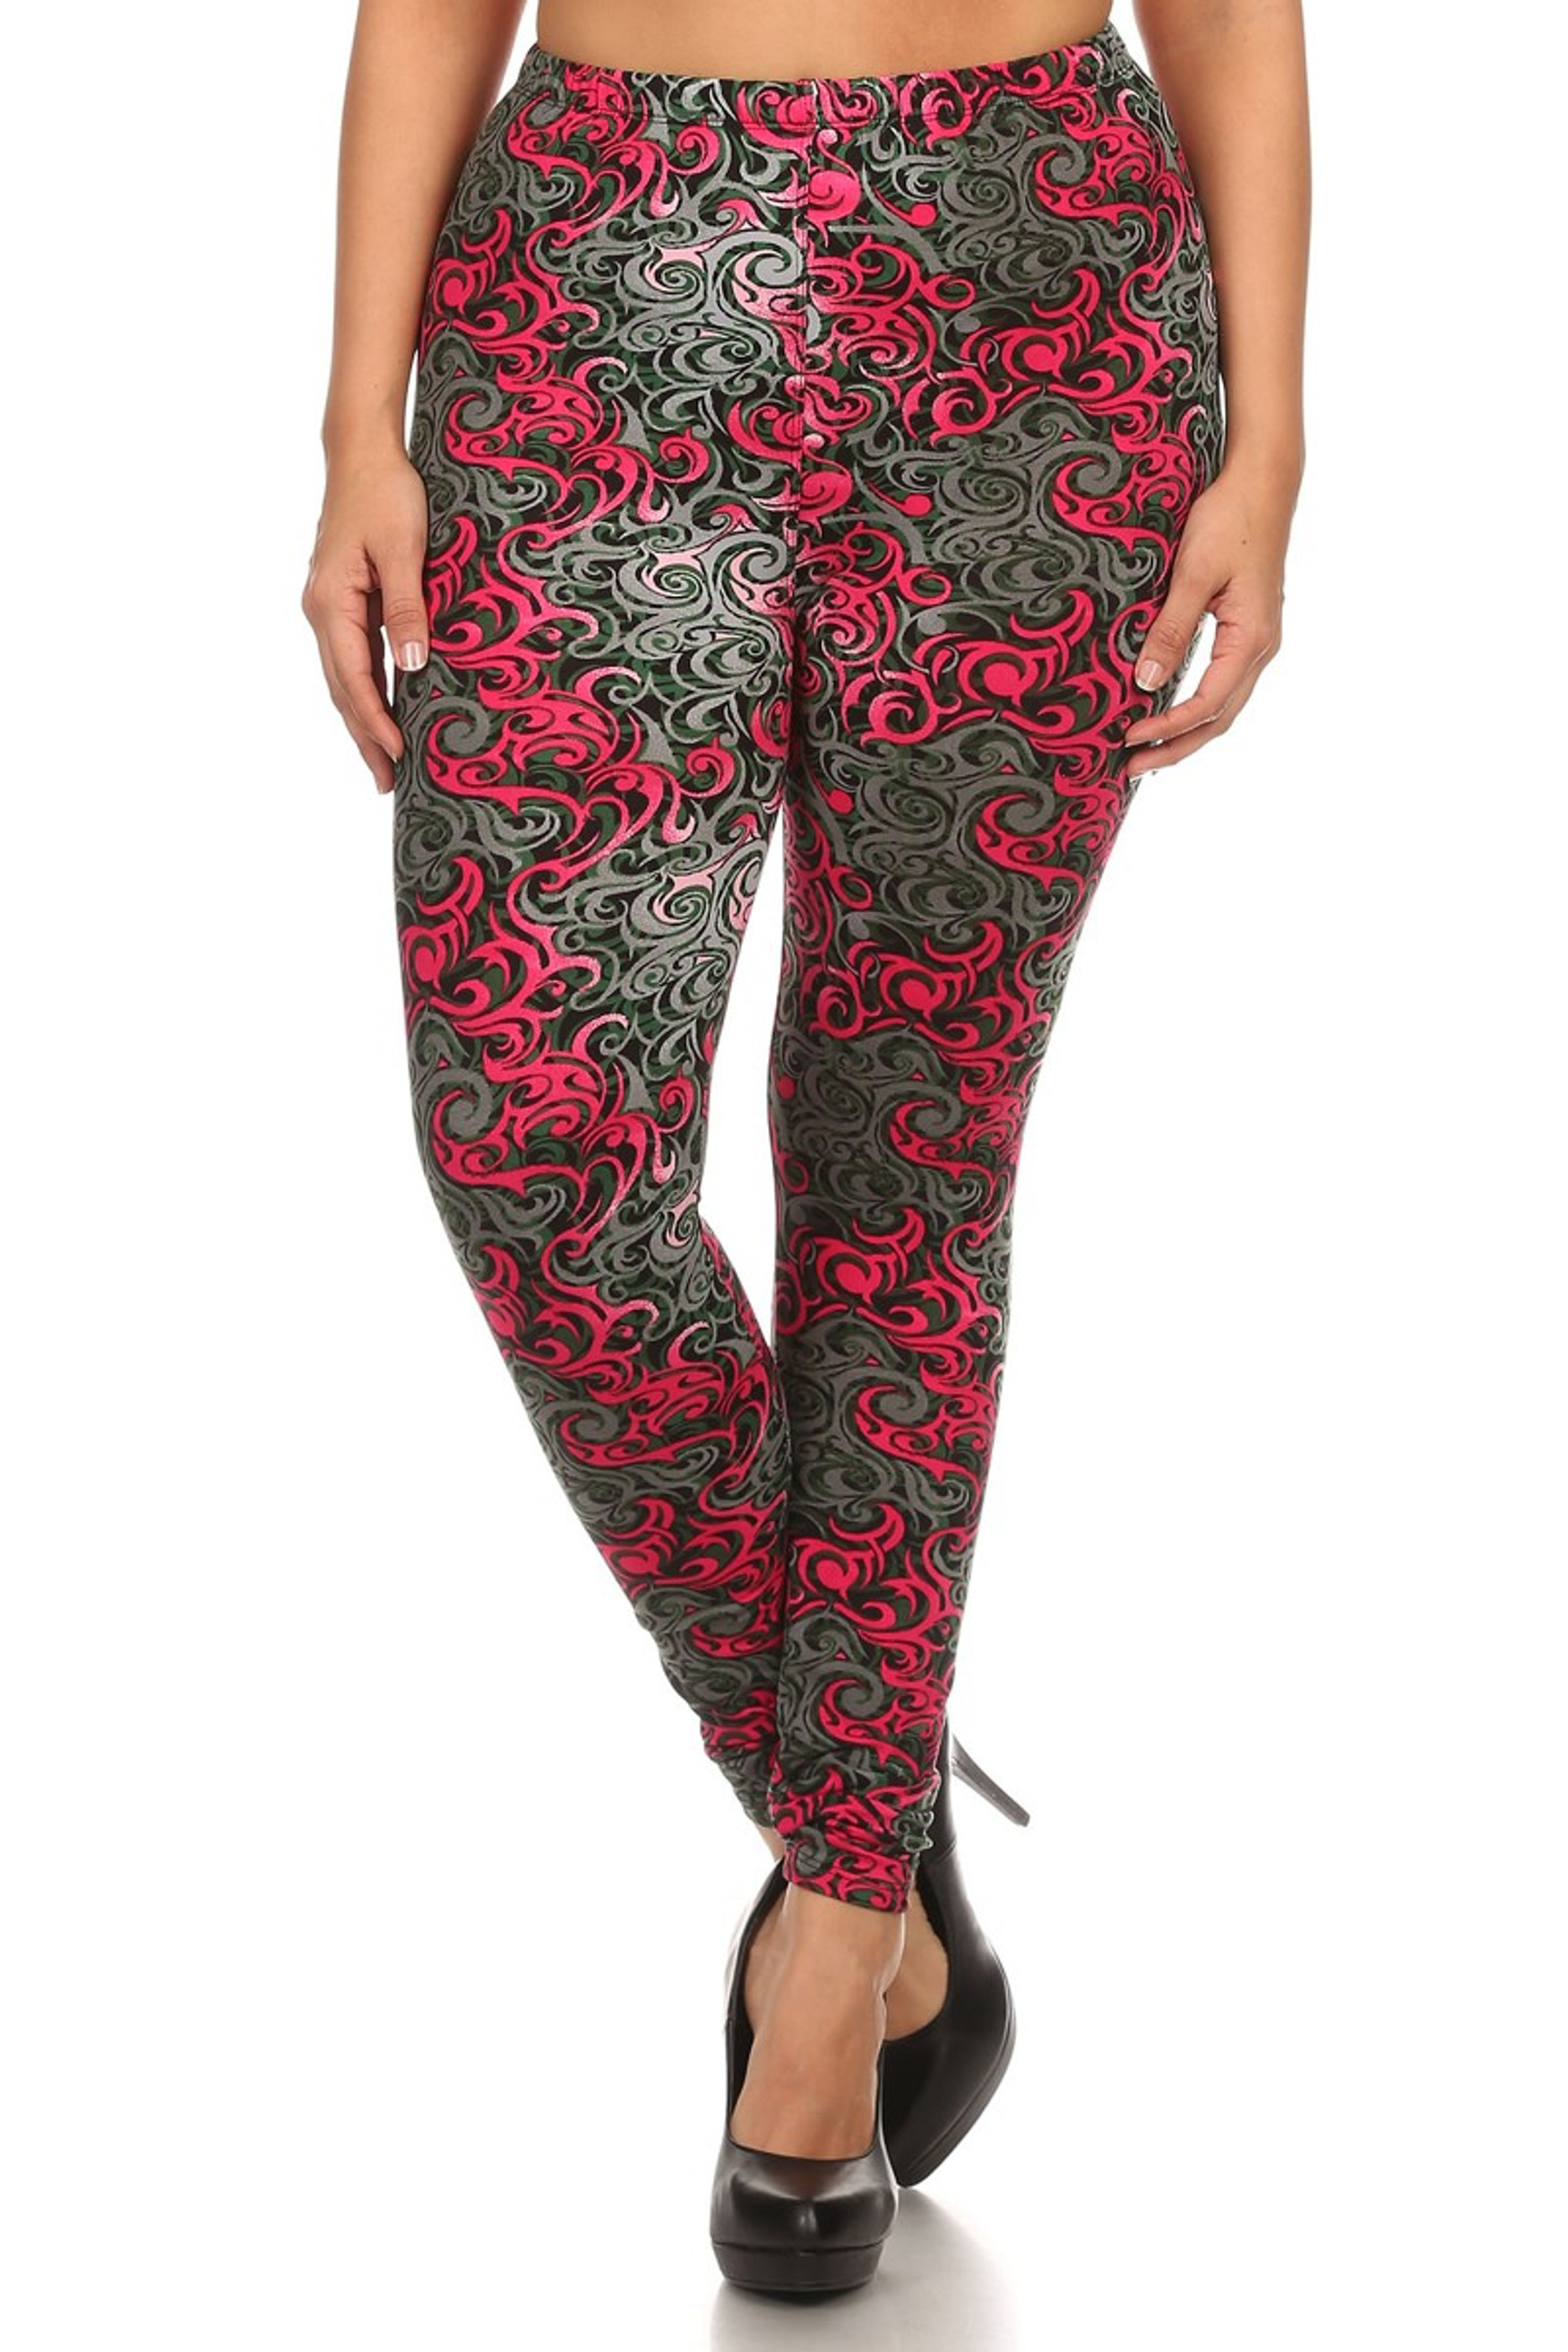 Front image of Buttery Soft Fuchsia Hypnotic Swirl Extra Plus Size Leggings - 3X-5X